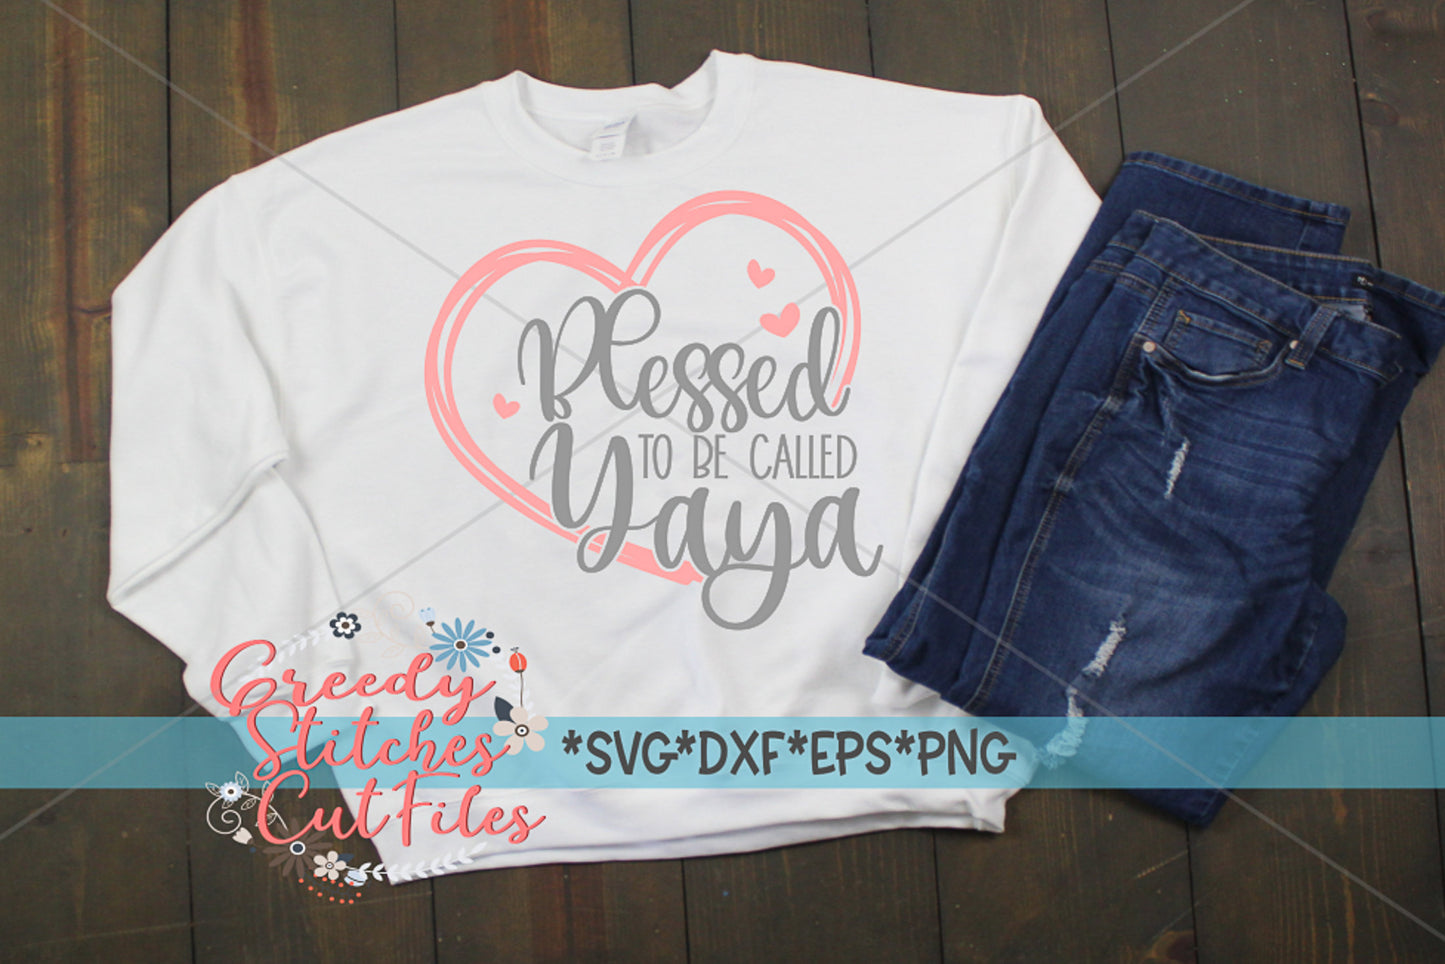 Blessed To Be Called Yaya SvG | Mother&#39;s Day SVG | Yaya EpS | Yaya SVG | Yaya DxF | Blessed Yaya svg dxf eps png. Instant Download Cut File